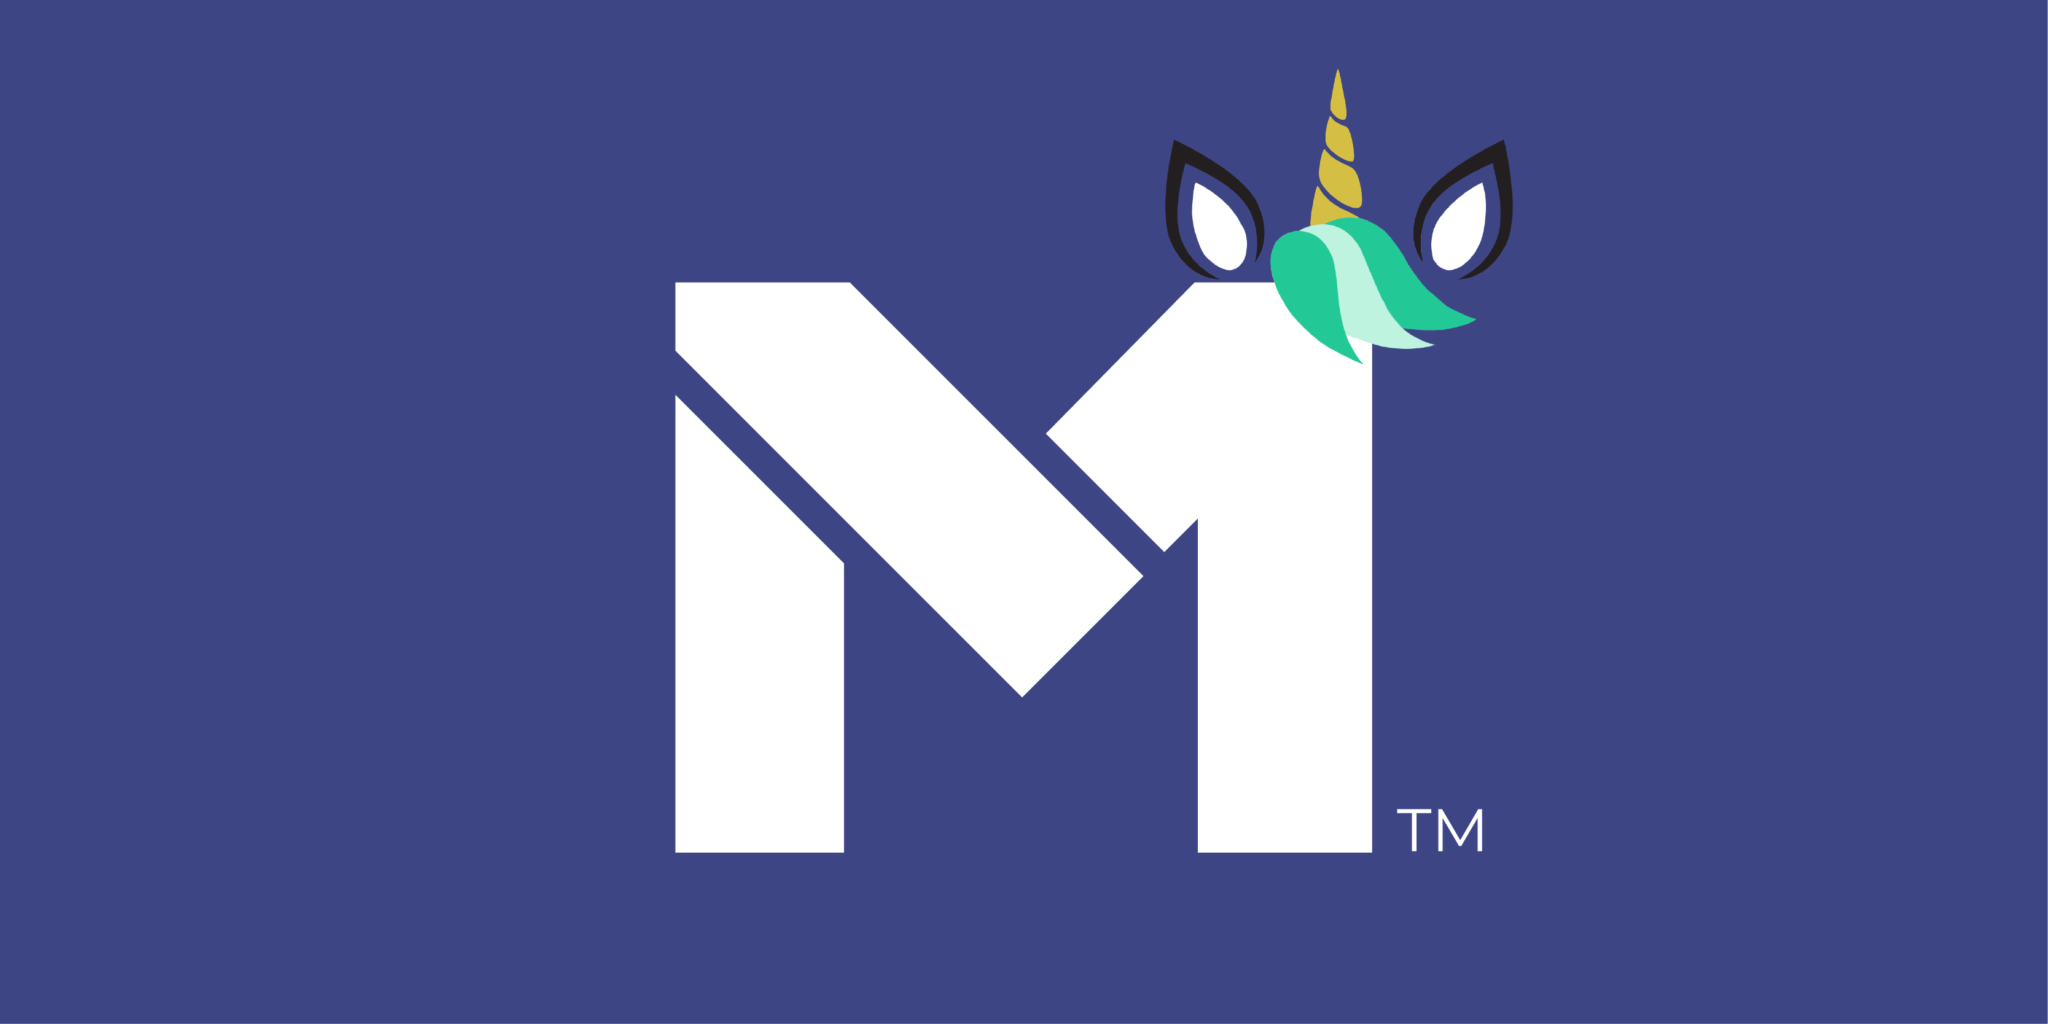 Image of the M1 logo with a unicorn sticker on the top right